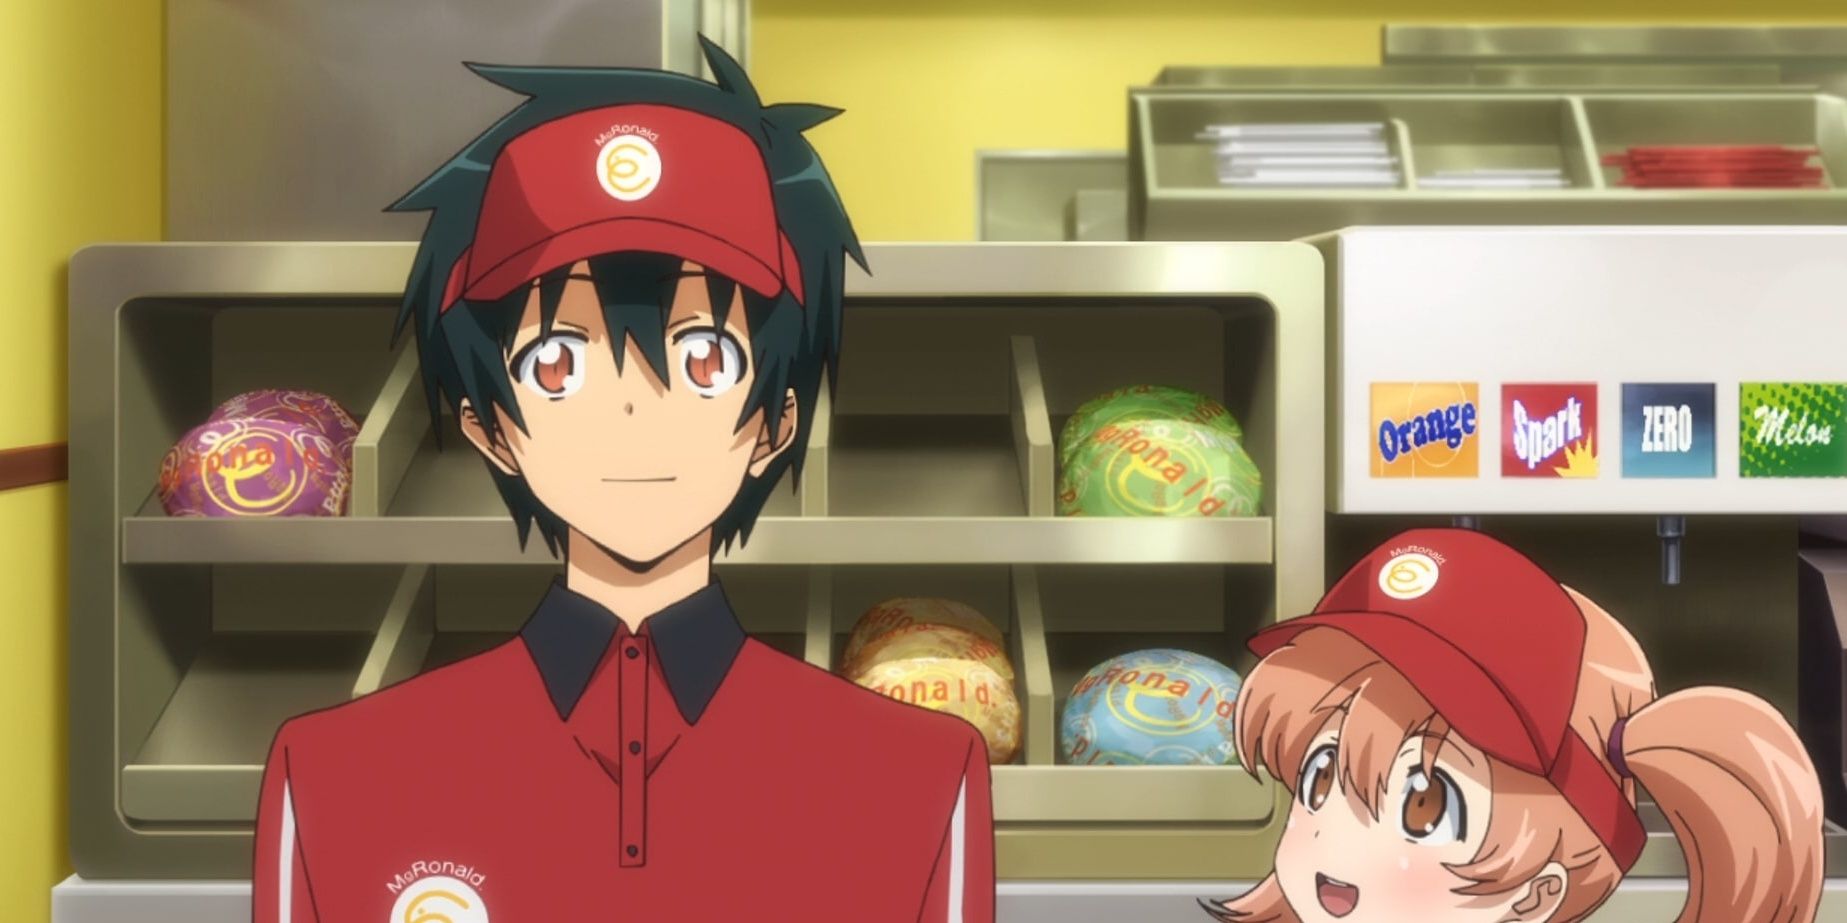 Maou Working at MgRonalds